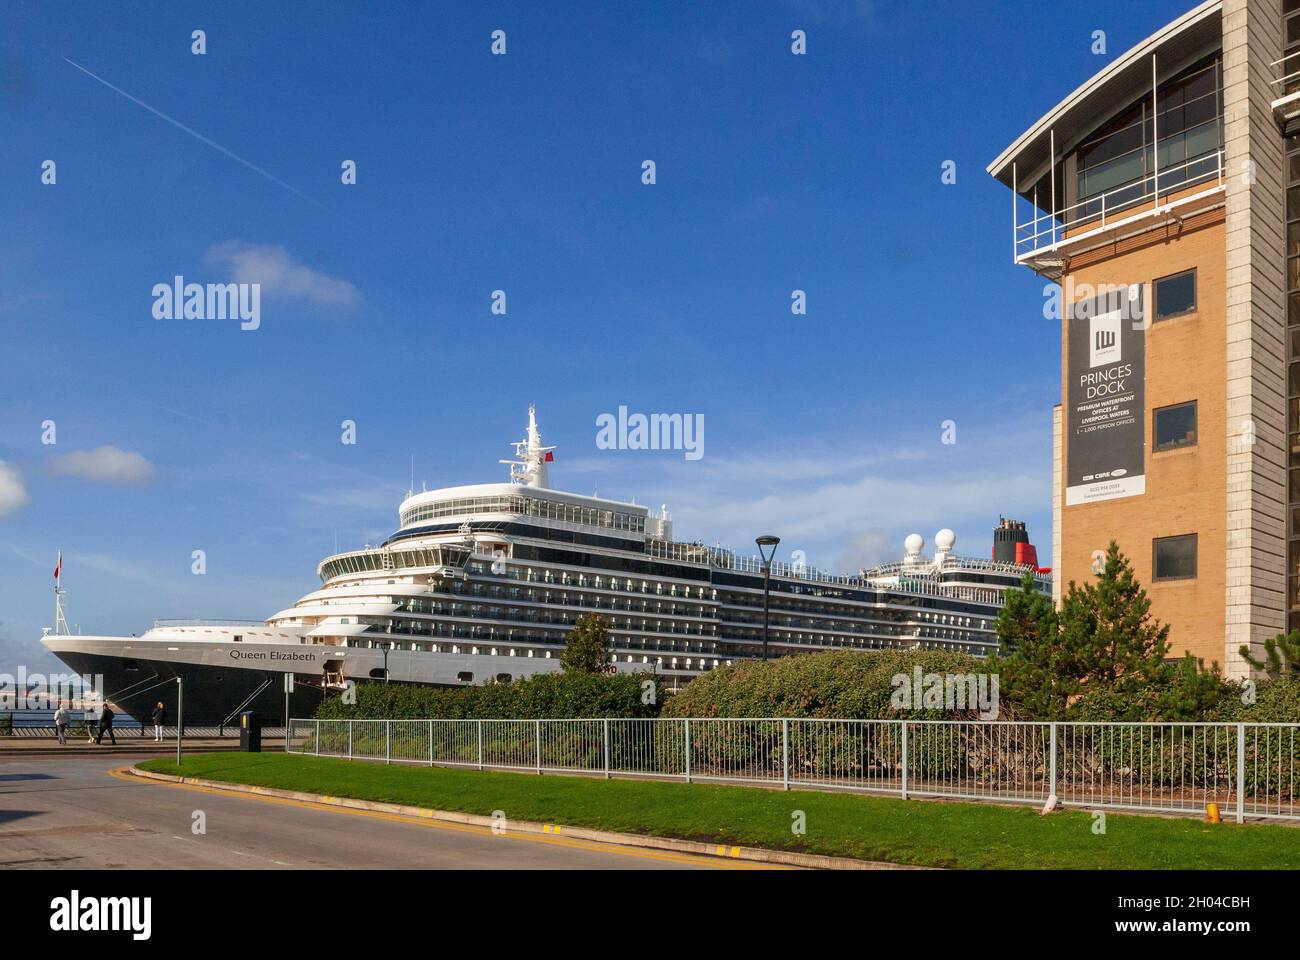 Cunard cruise liner Queen Elizabeth at Liverpool Cruise terminal. Stock Photo